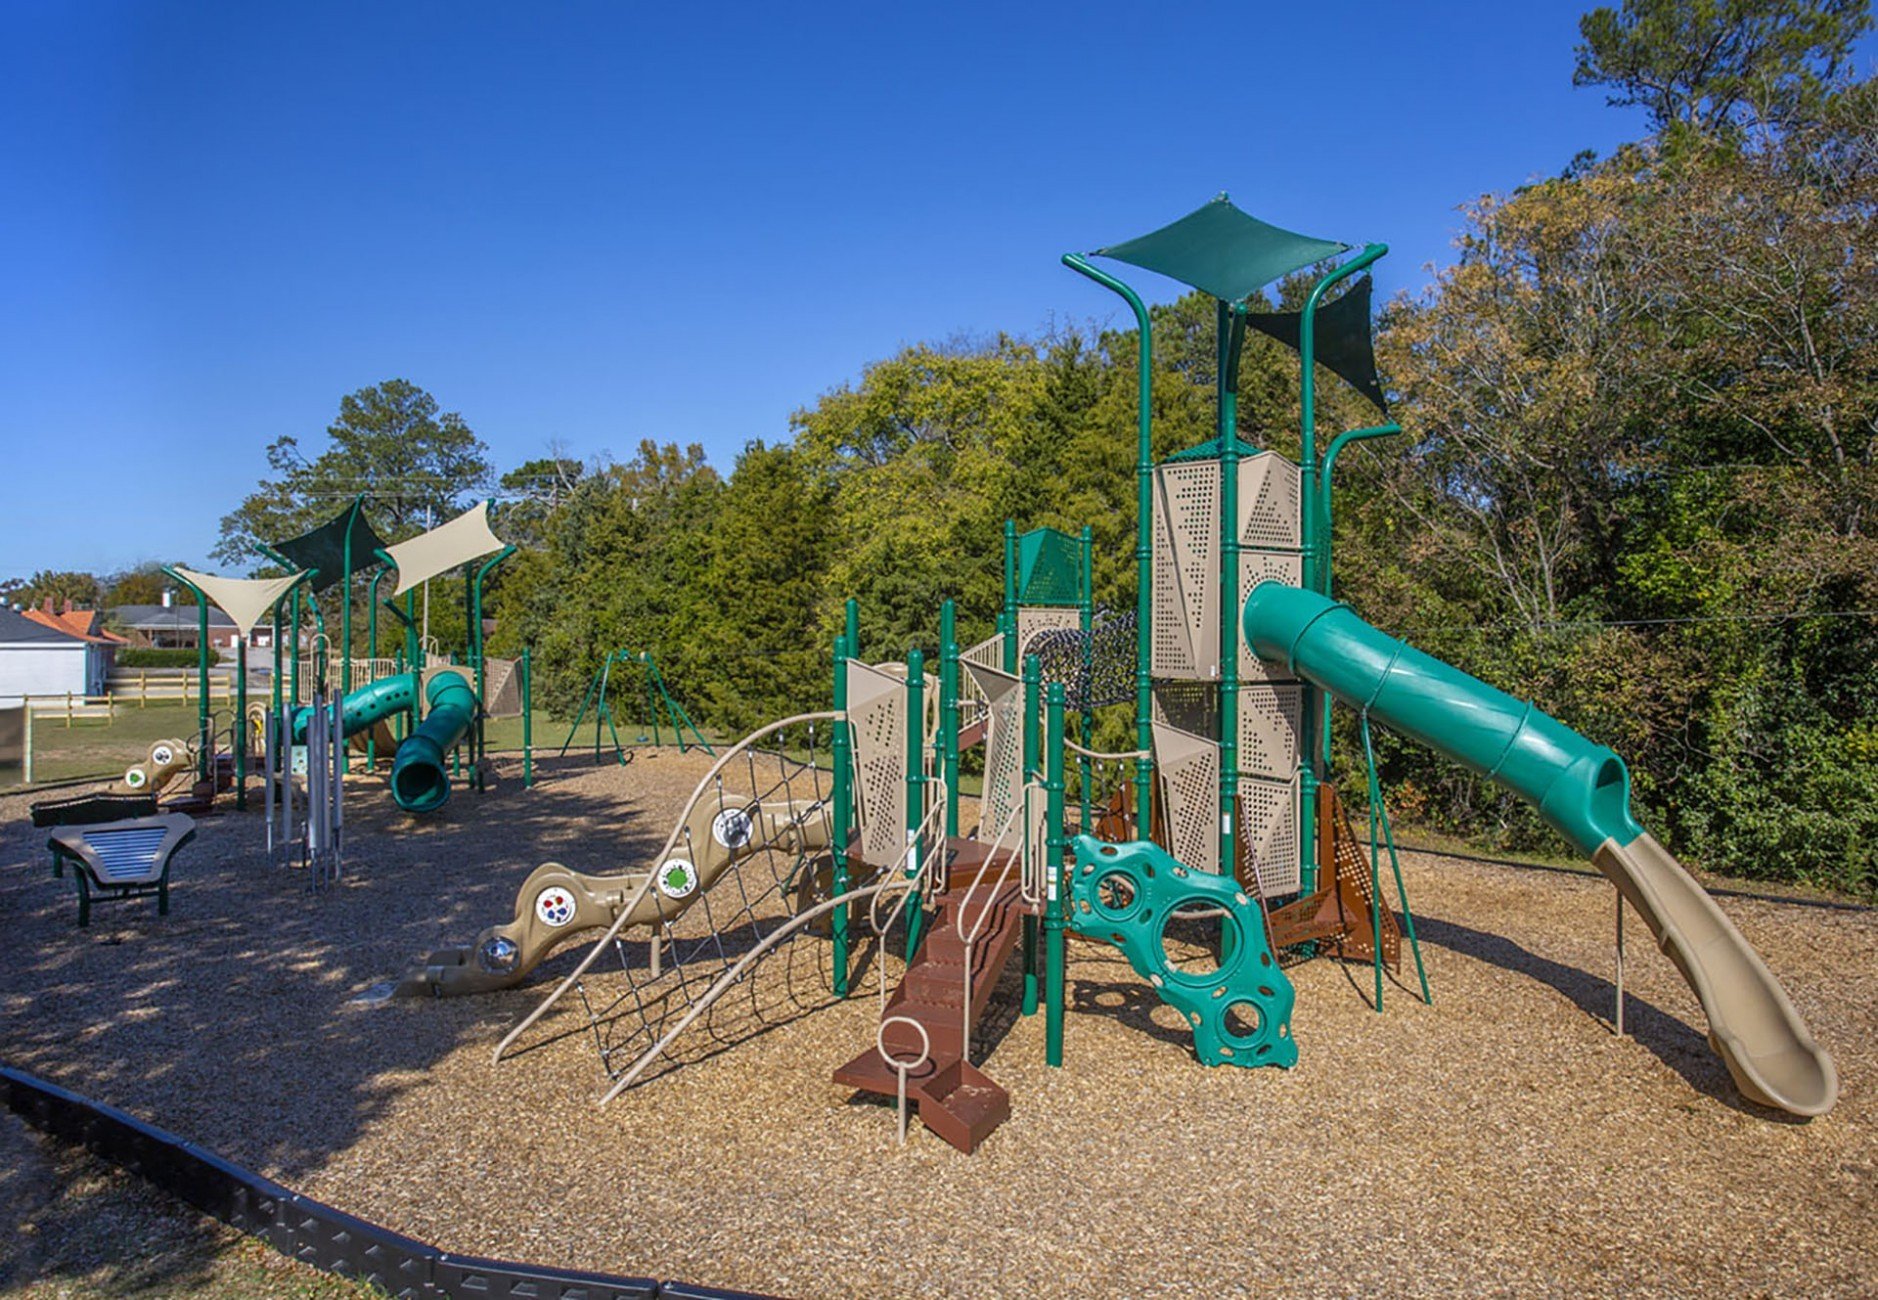 Featured image of image of brown and green colored themed playground in front of trees